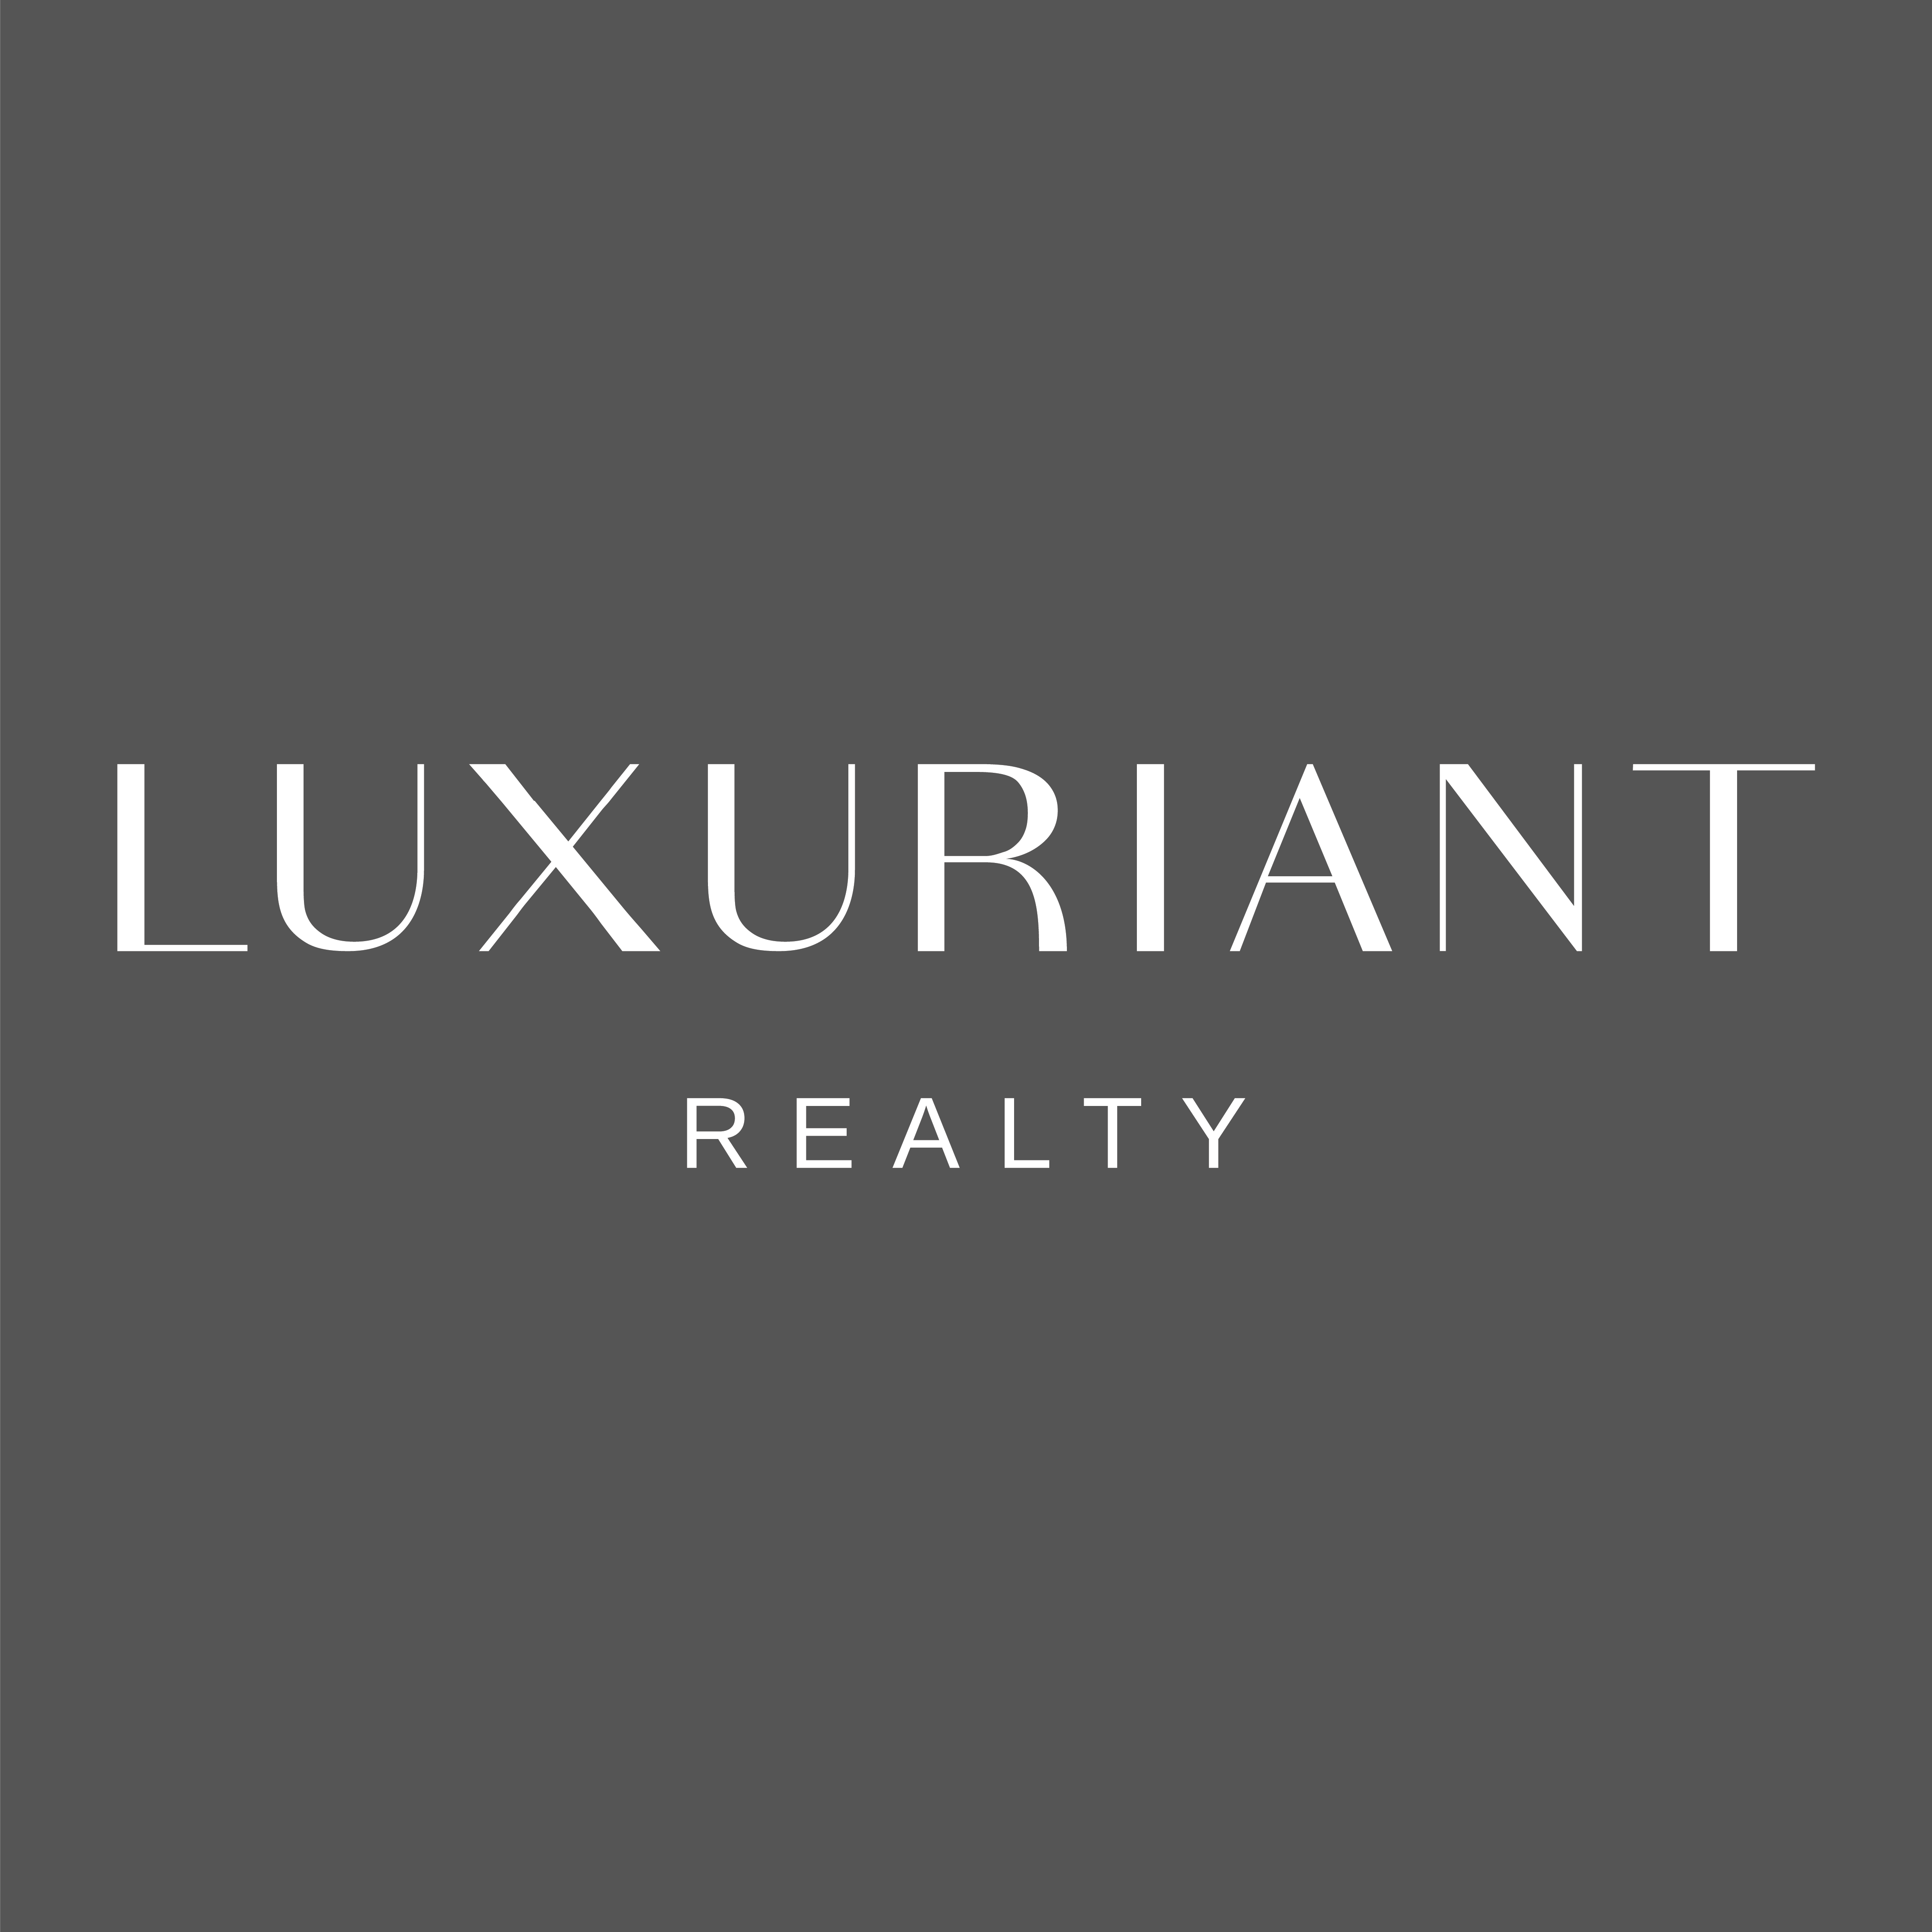 Luxuriant Realty